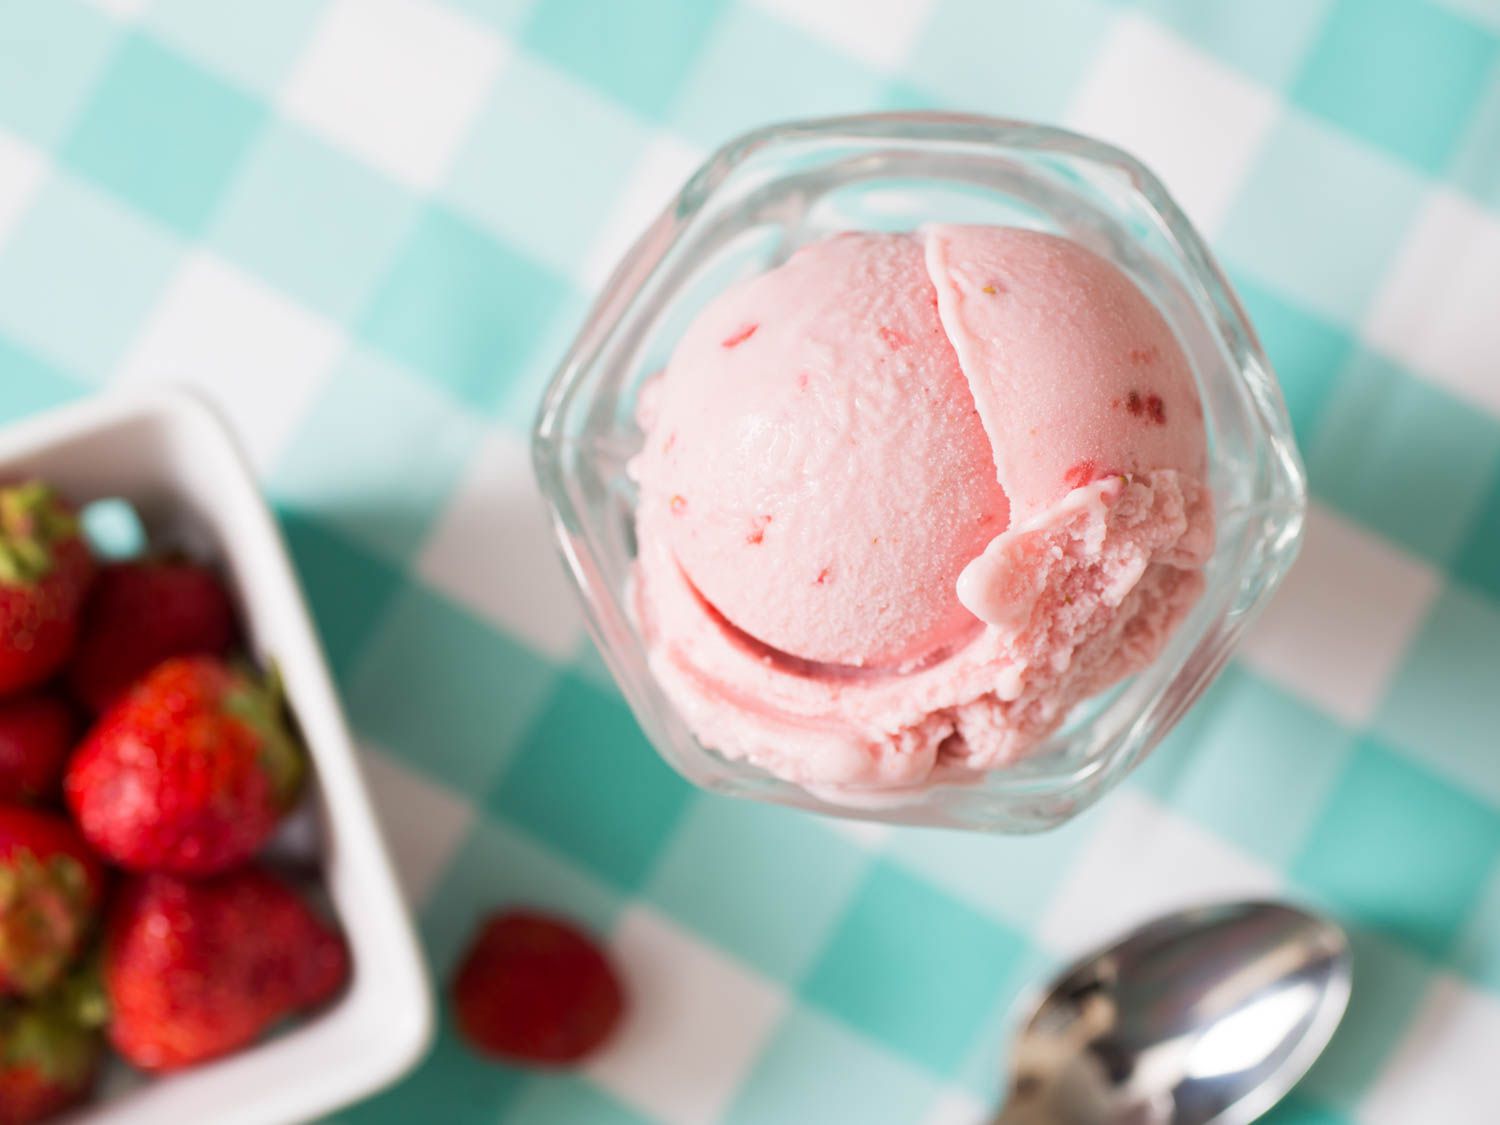 An overhead view of a scoop of strawberry ice cream next to a container of strawberries.